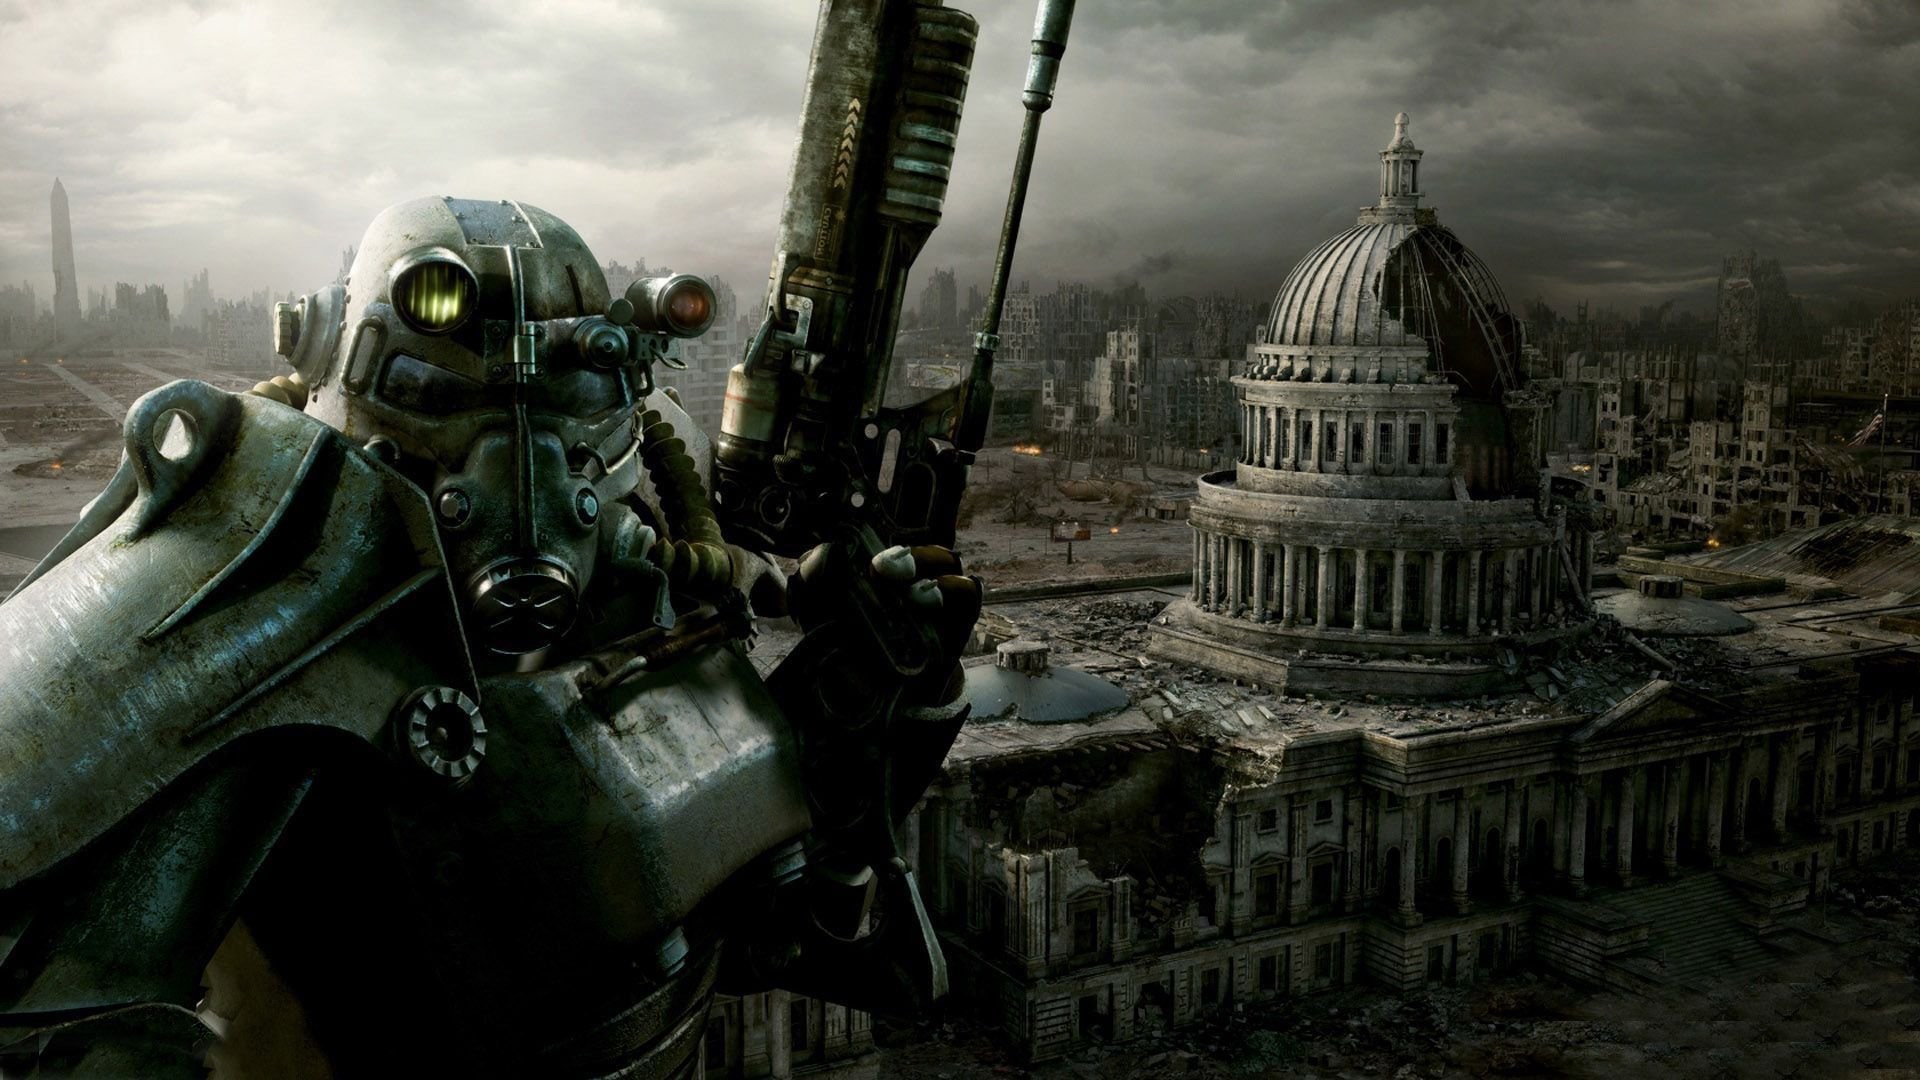 1920x1080 fallout fallout 3 brotherhood of steel wallpapers